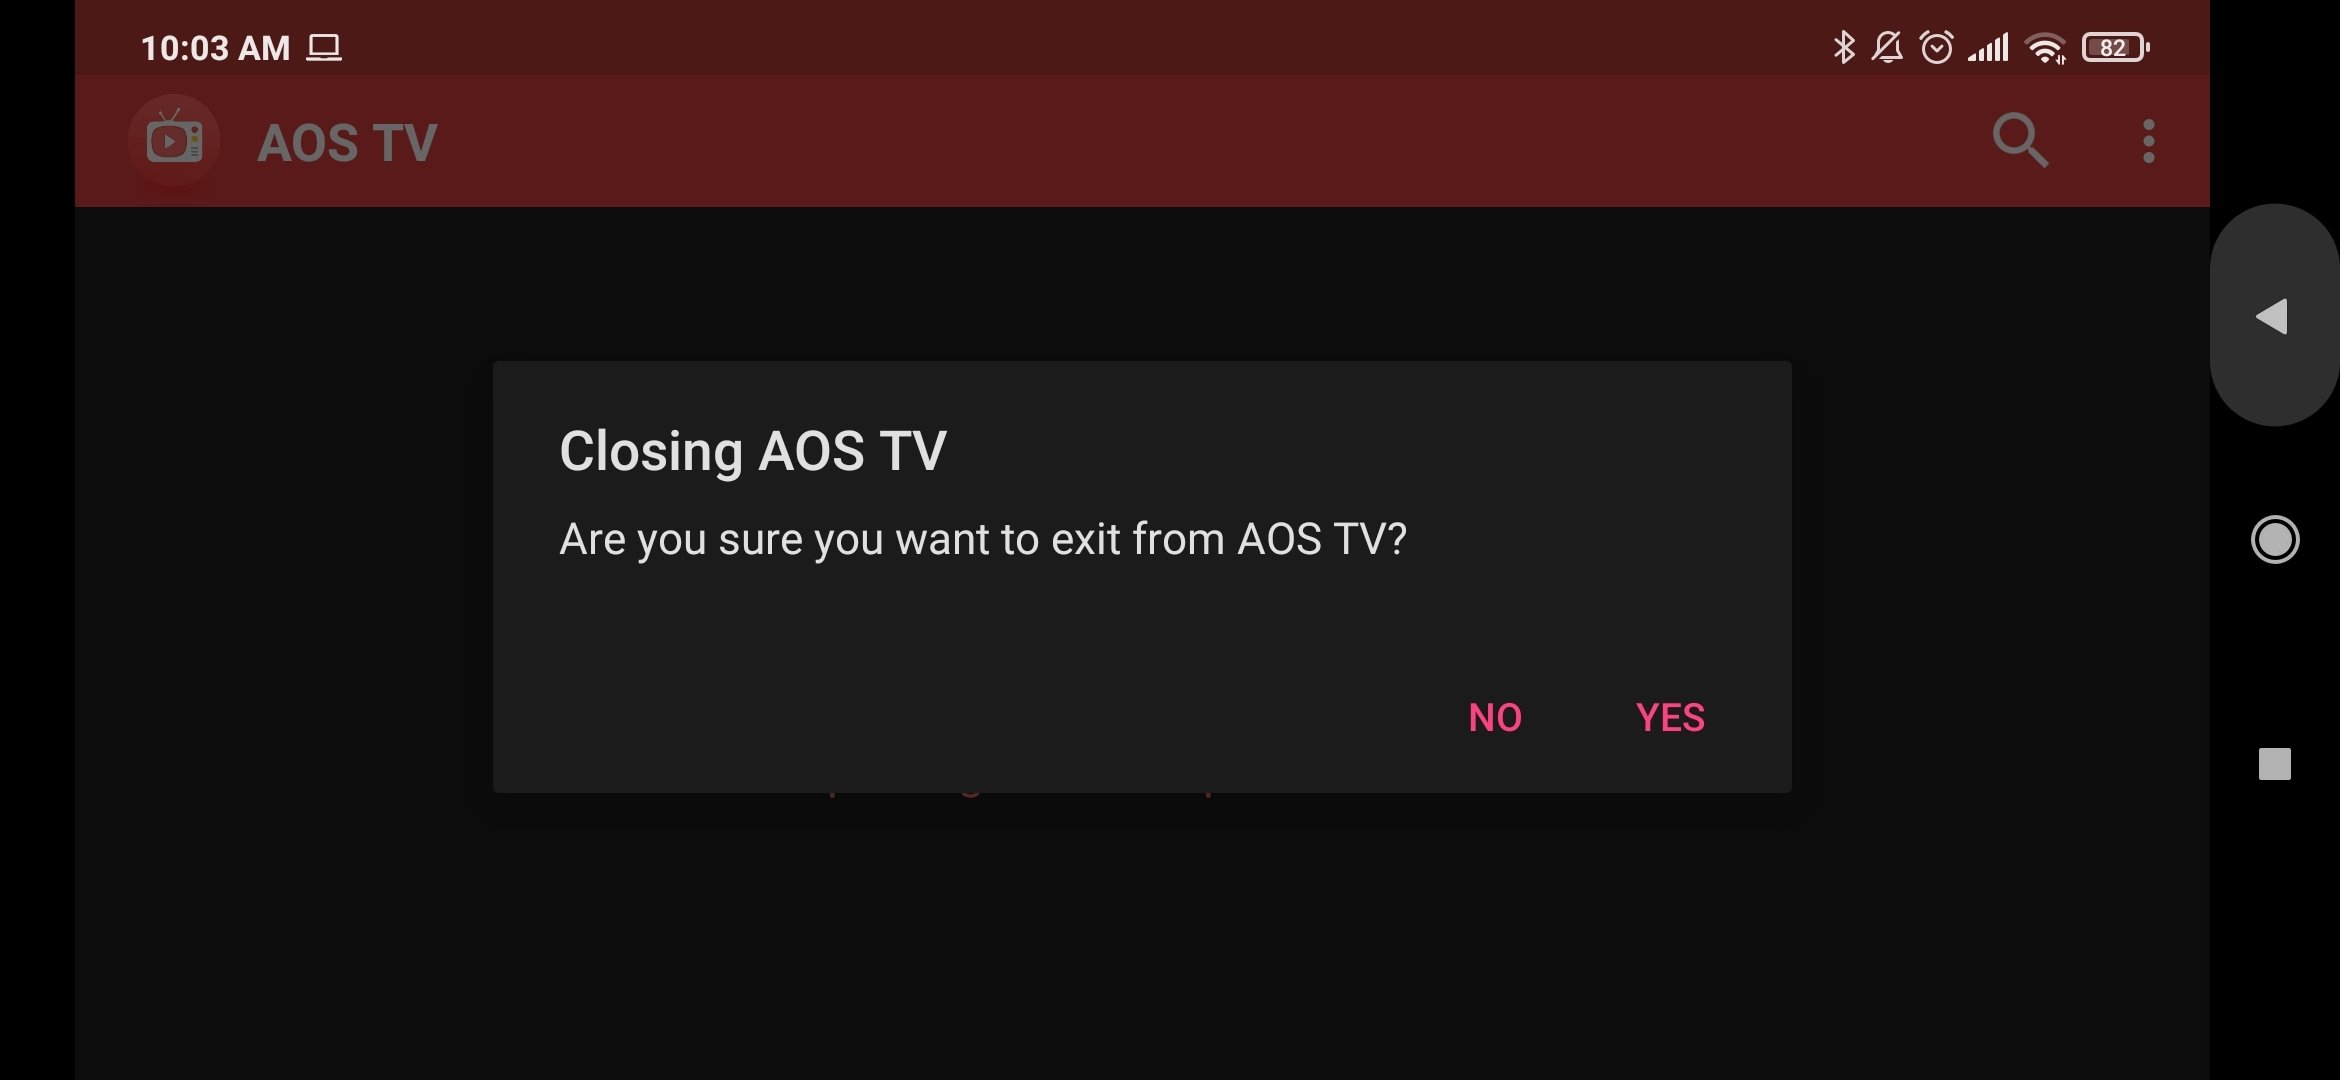 AOS TV 19.0.0 - Download for Android APK Free